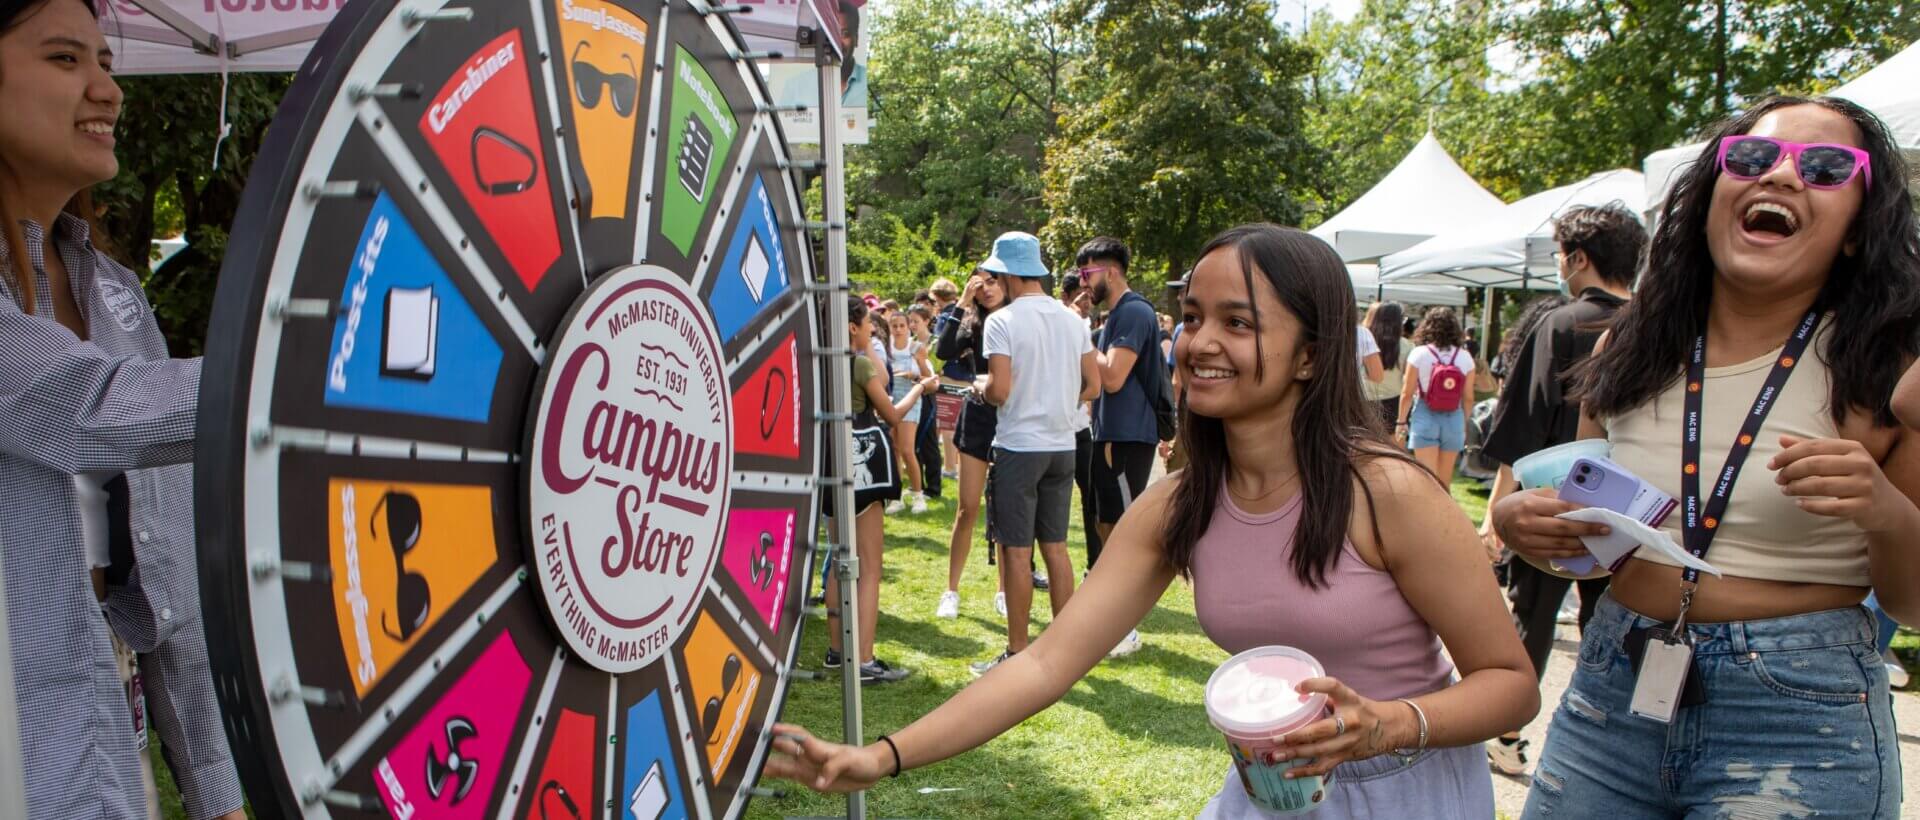 Students spinning wheel at carnival Welcome Week event.